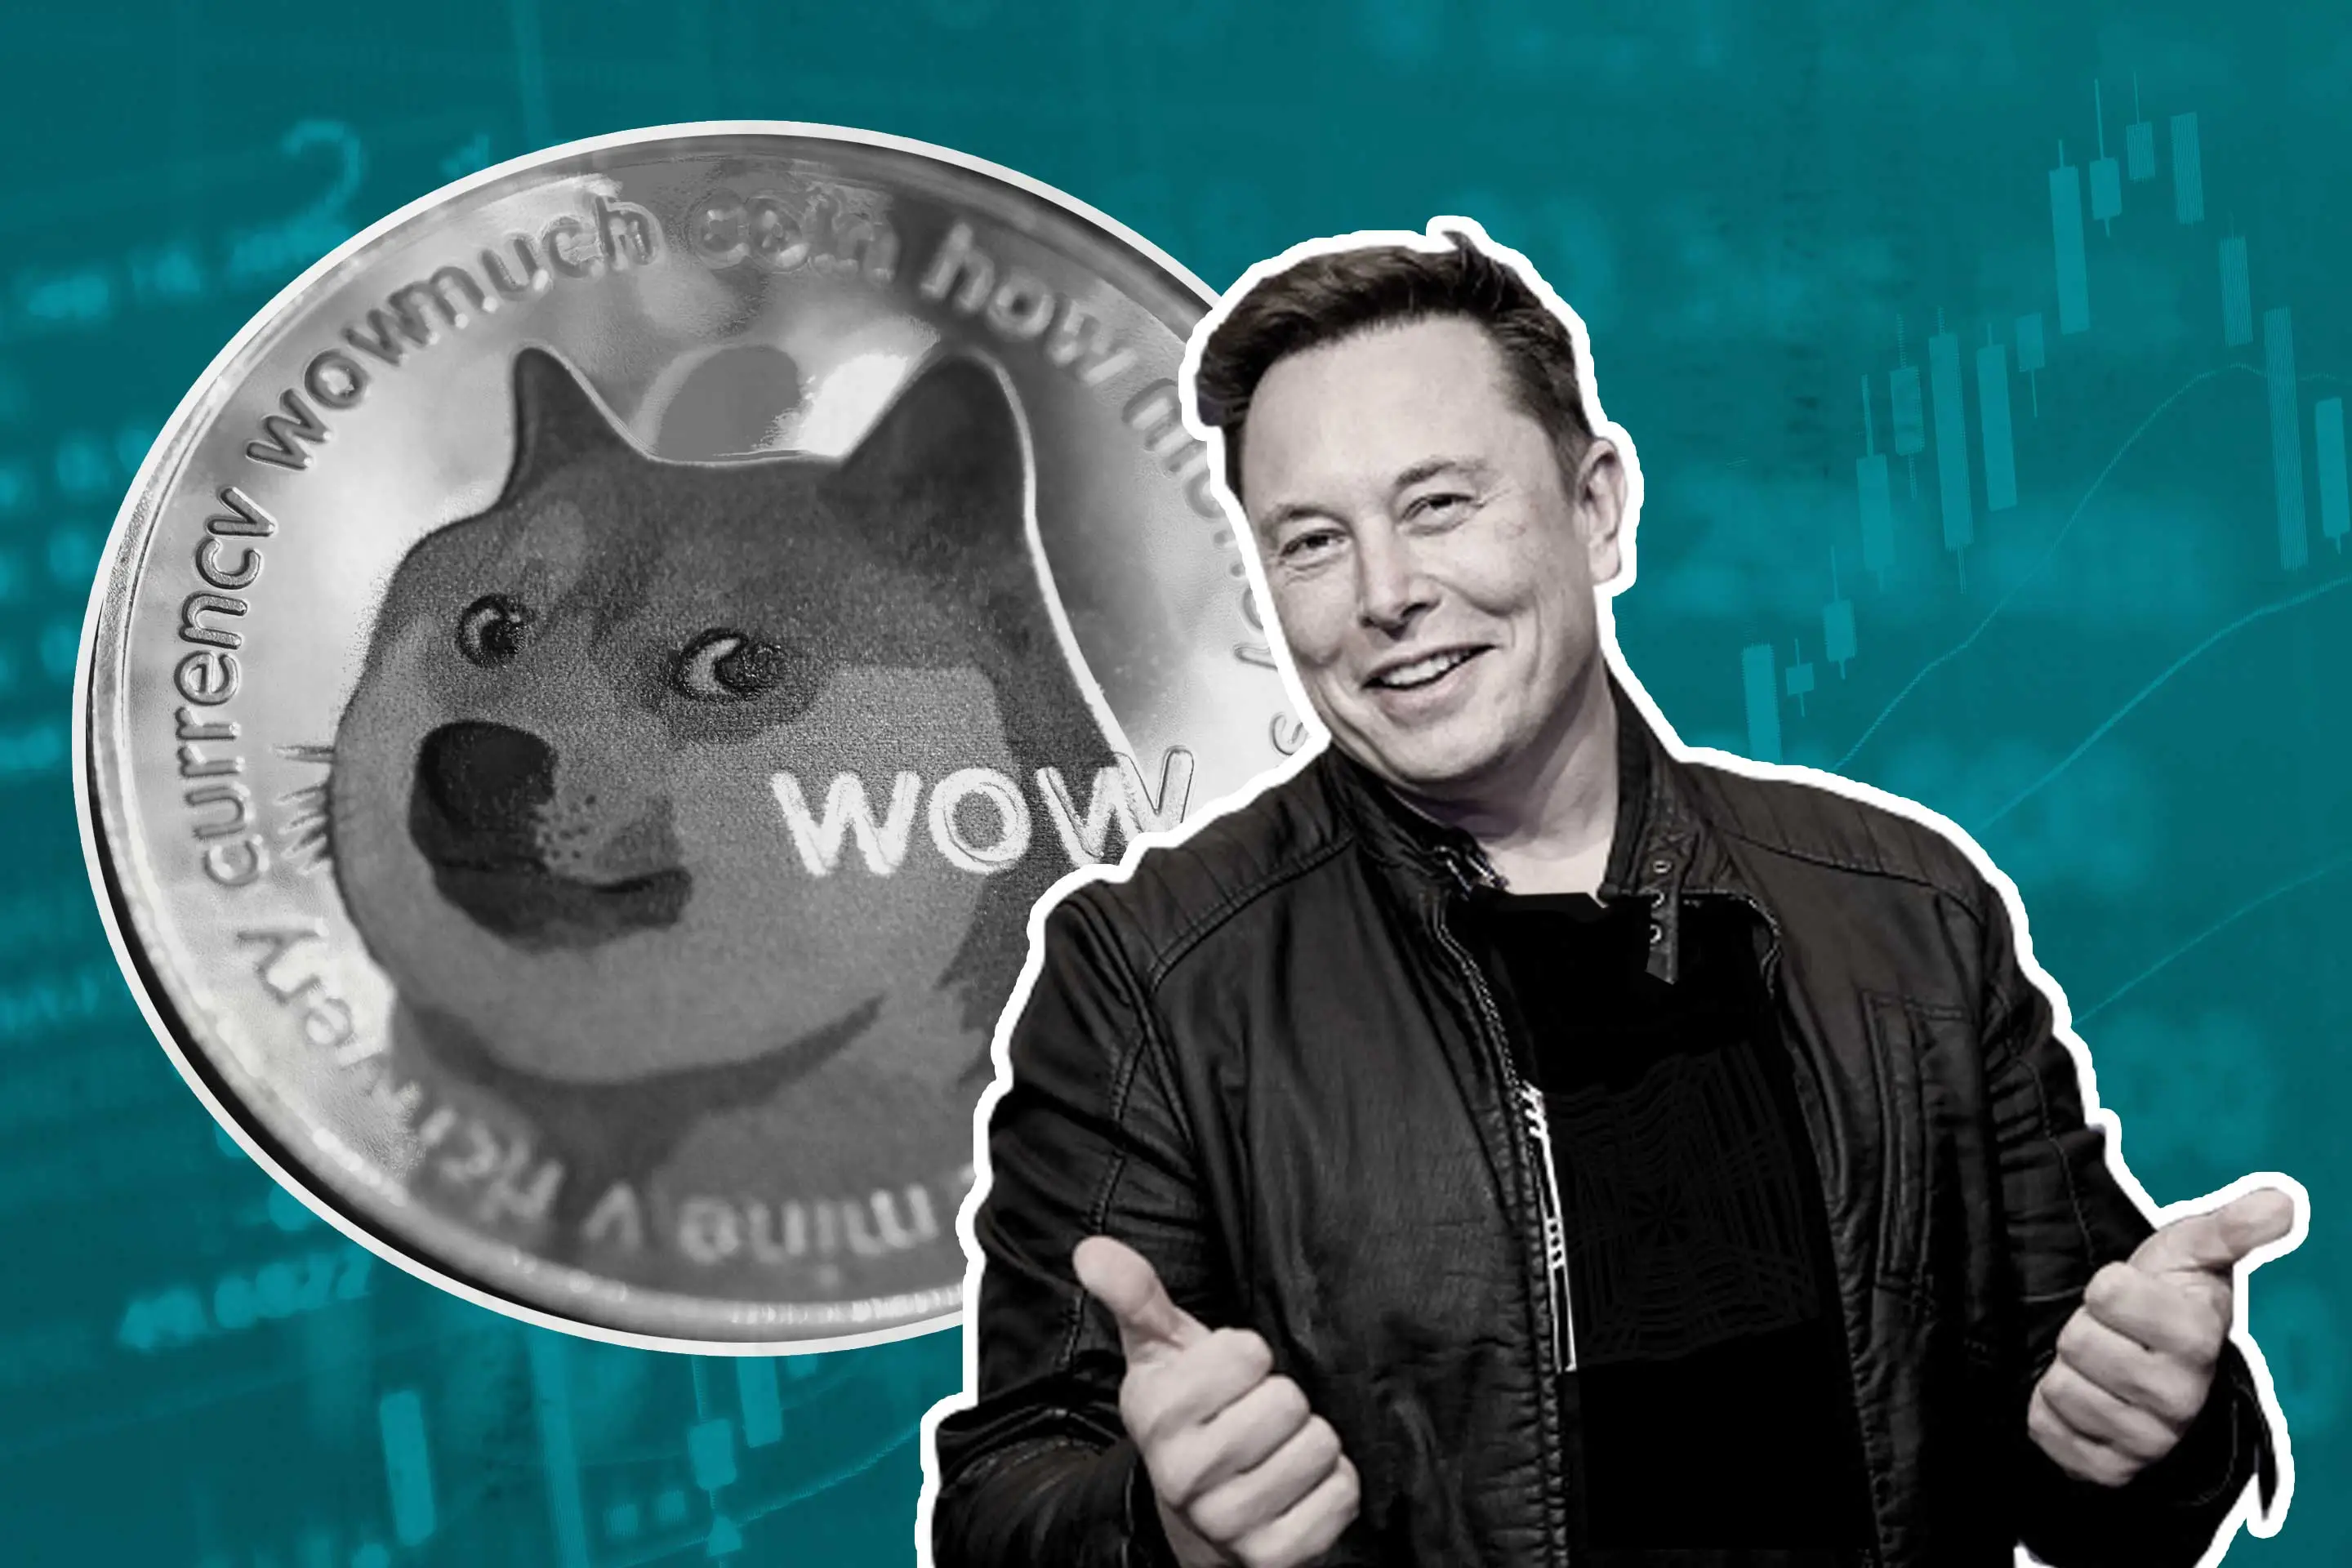 elon musk: Elon Musk says never suggested people should invest in Dogecoin - The Economic Times